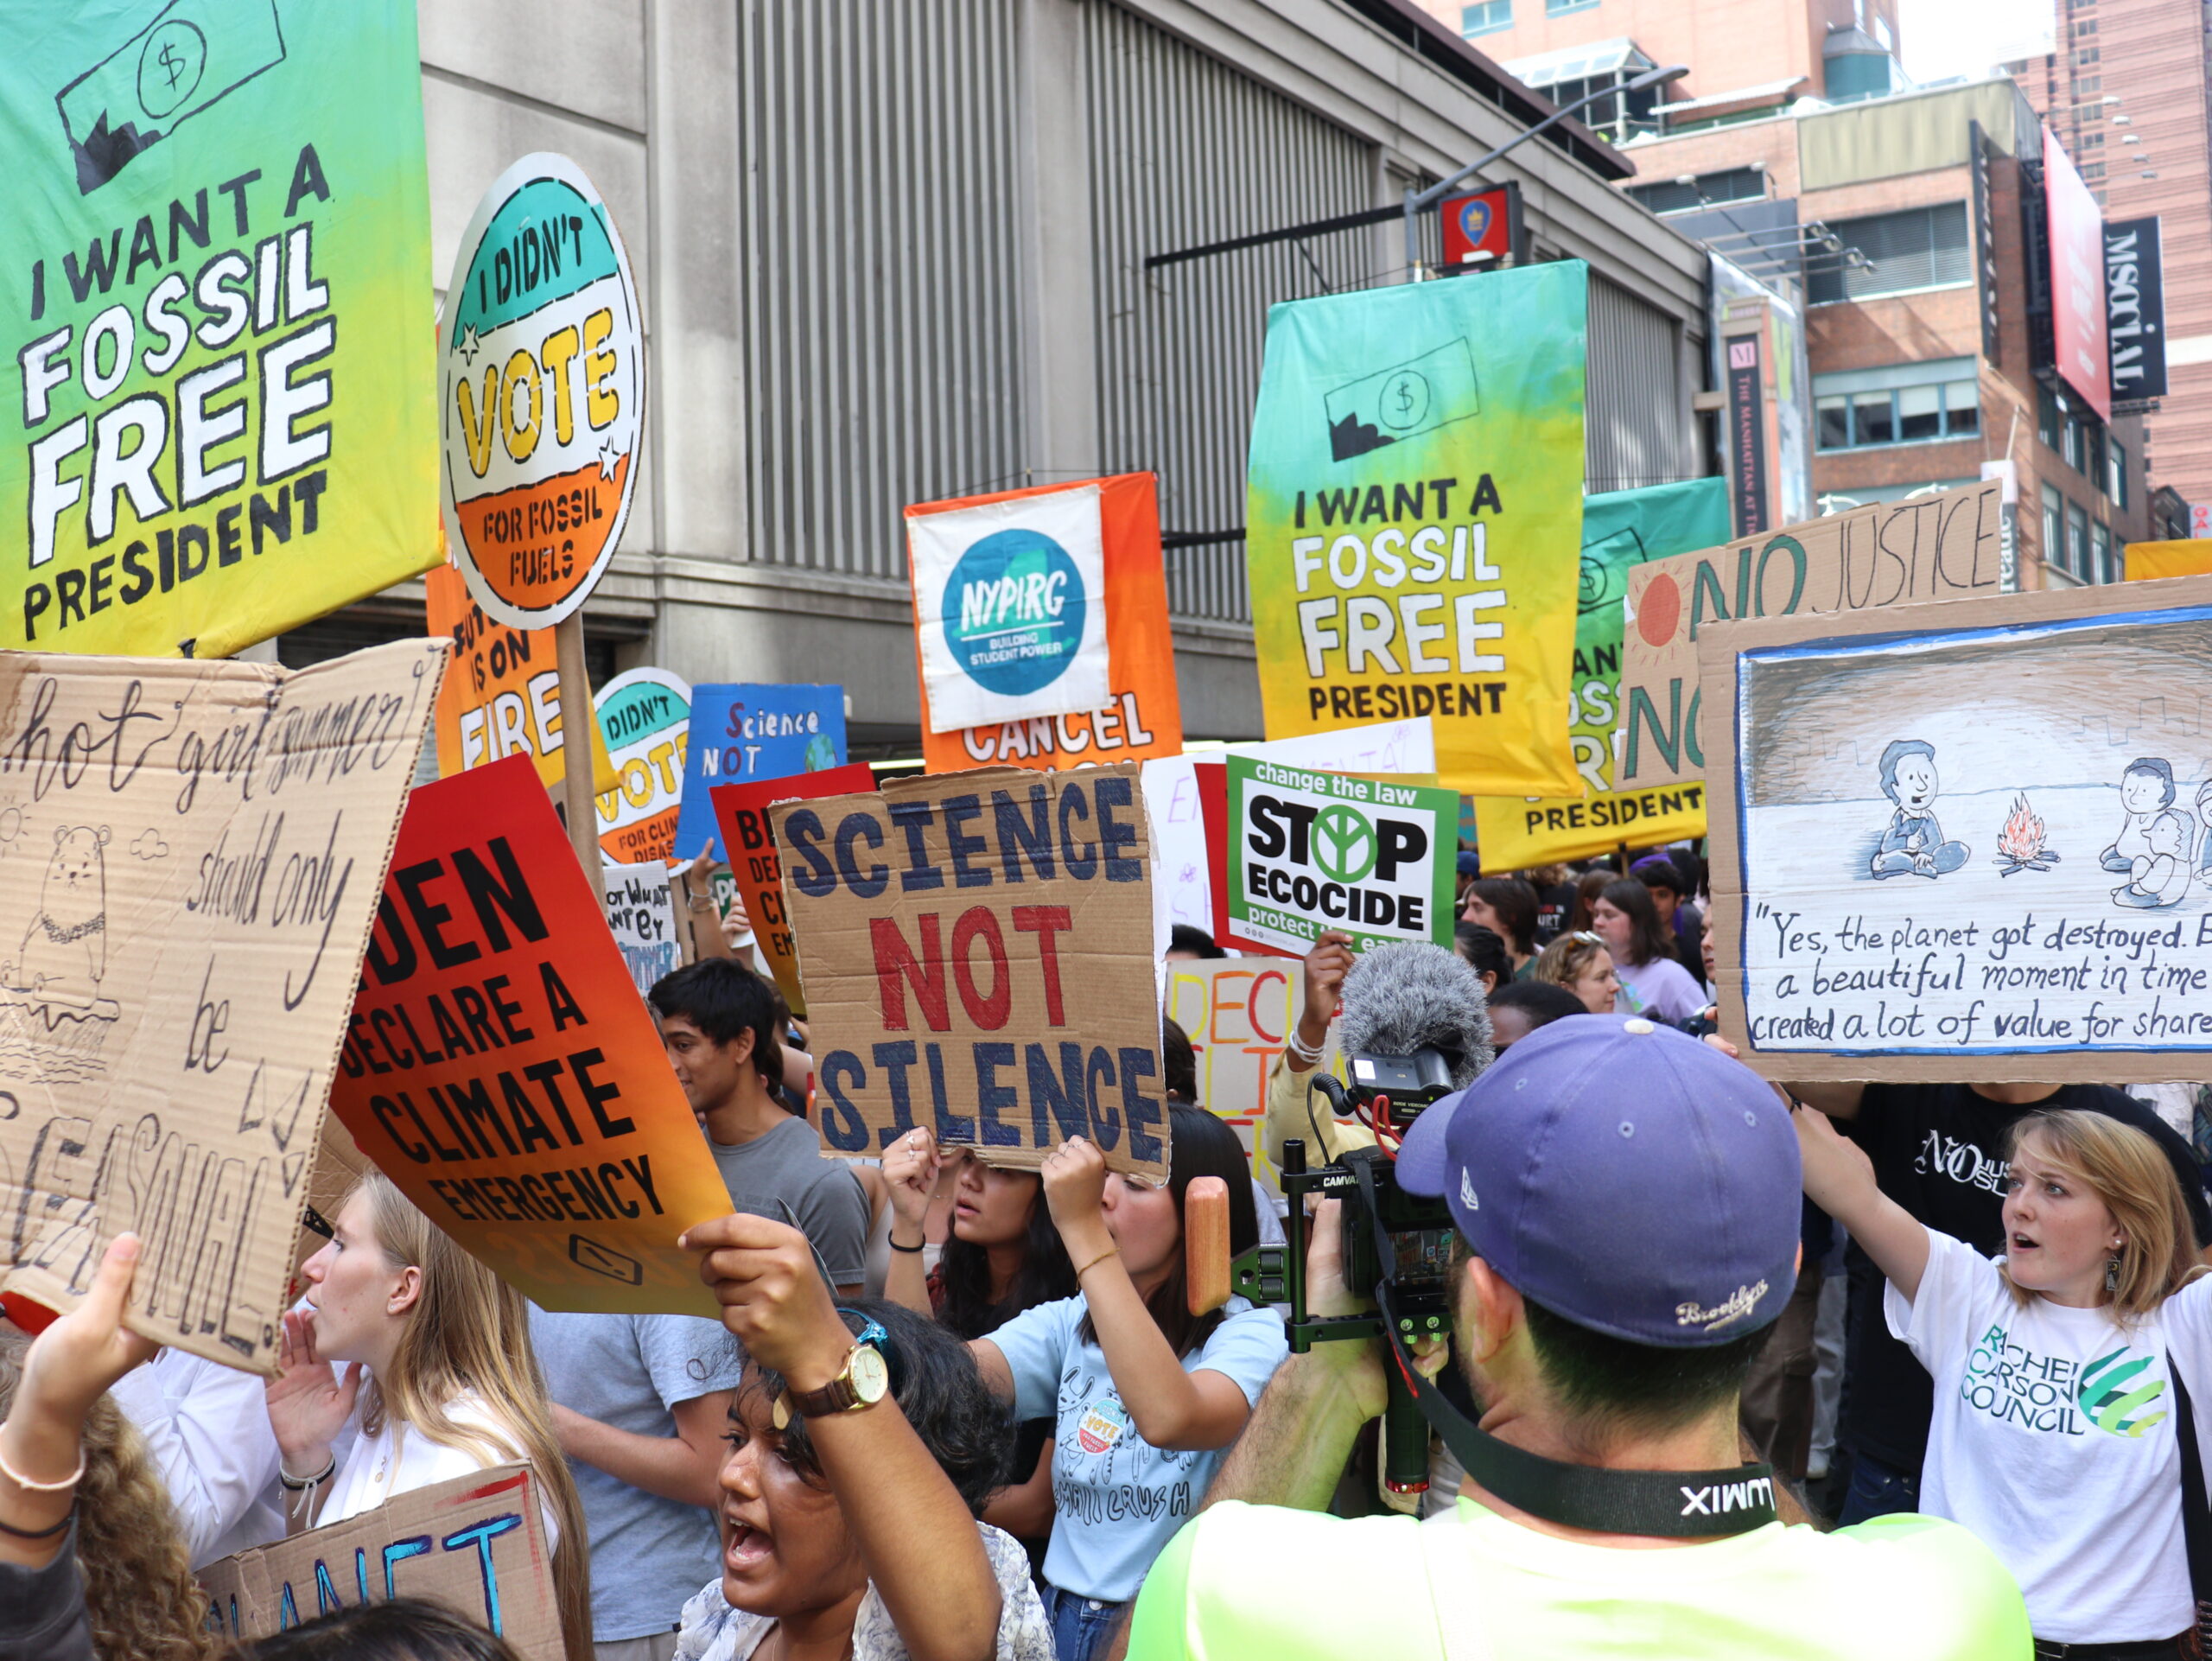 A realization of tomorrow: A Rachel Carson Council Fellow reflects on the NYC March to End Fossil Fuels